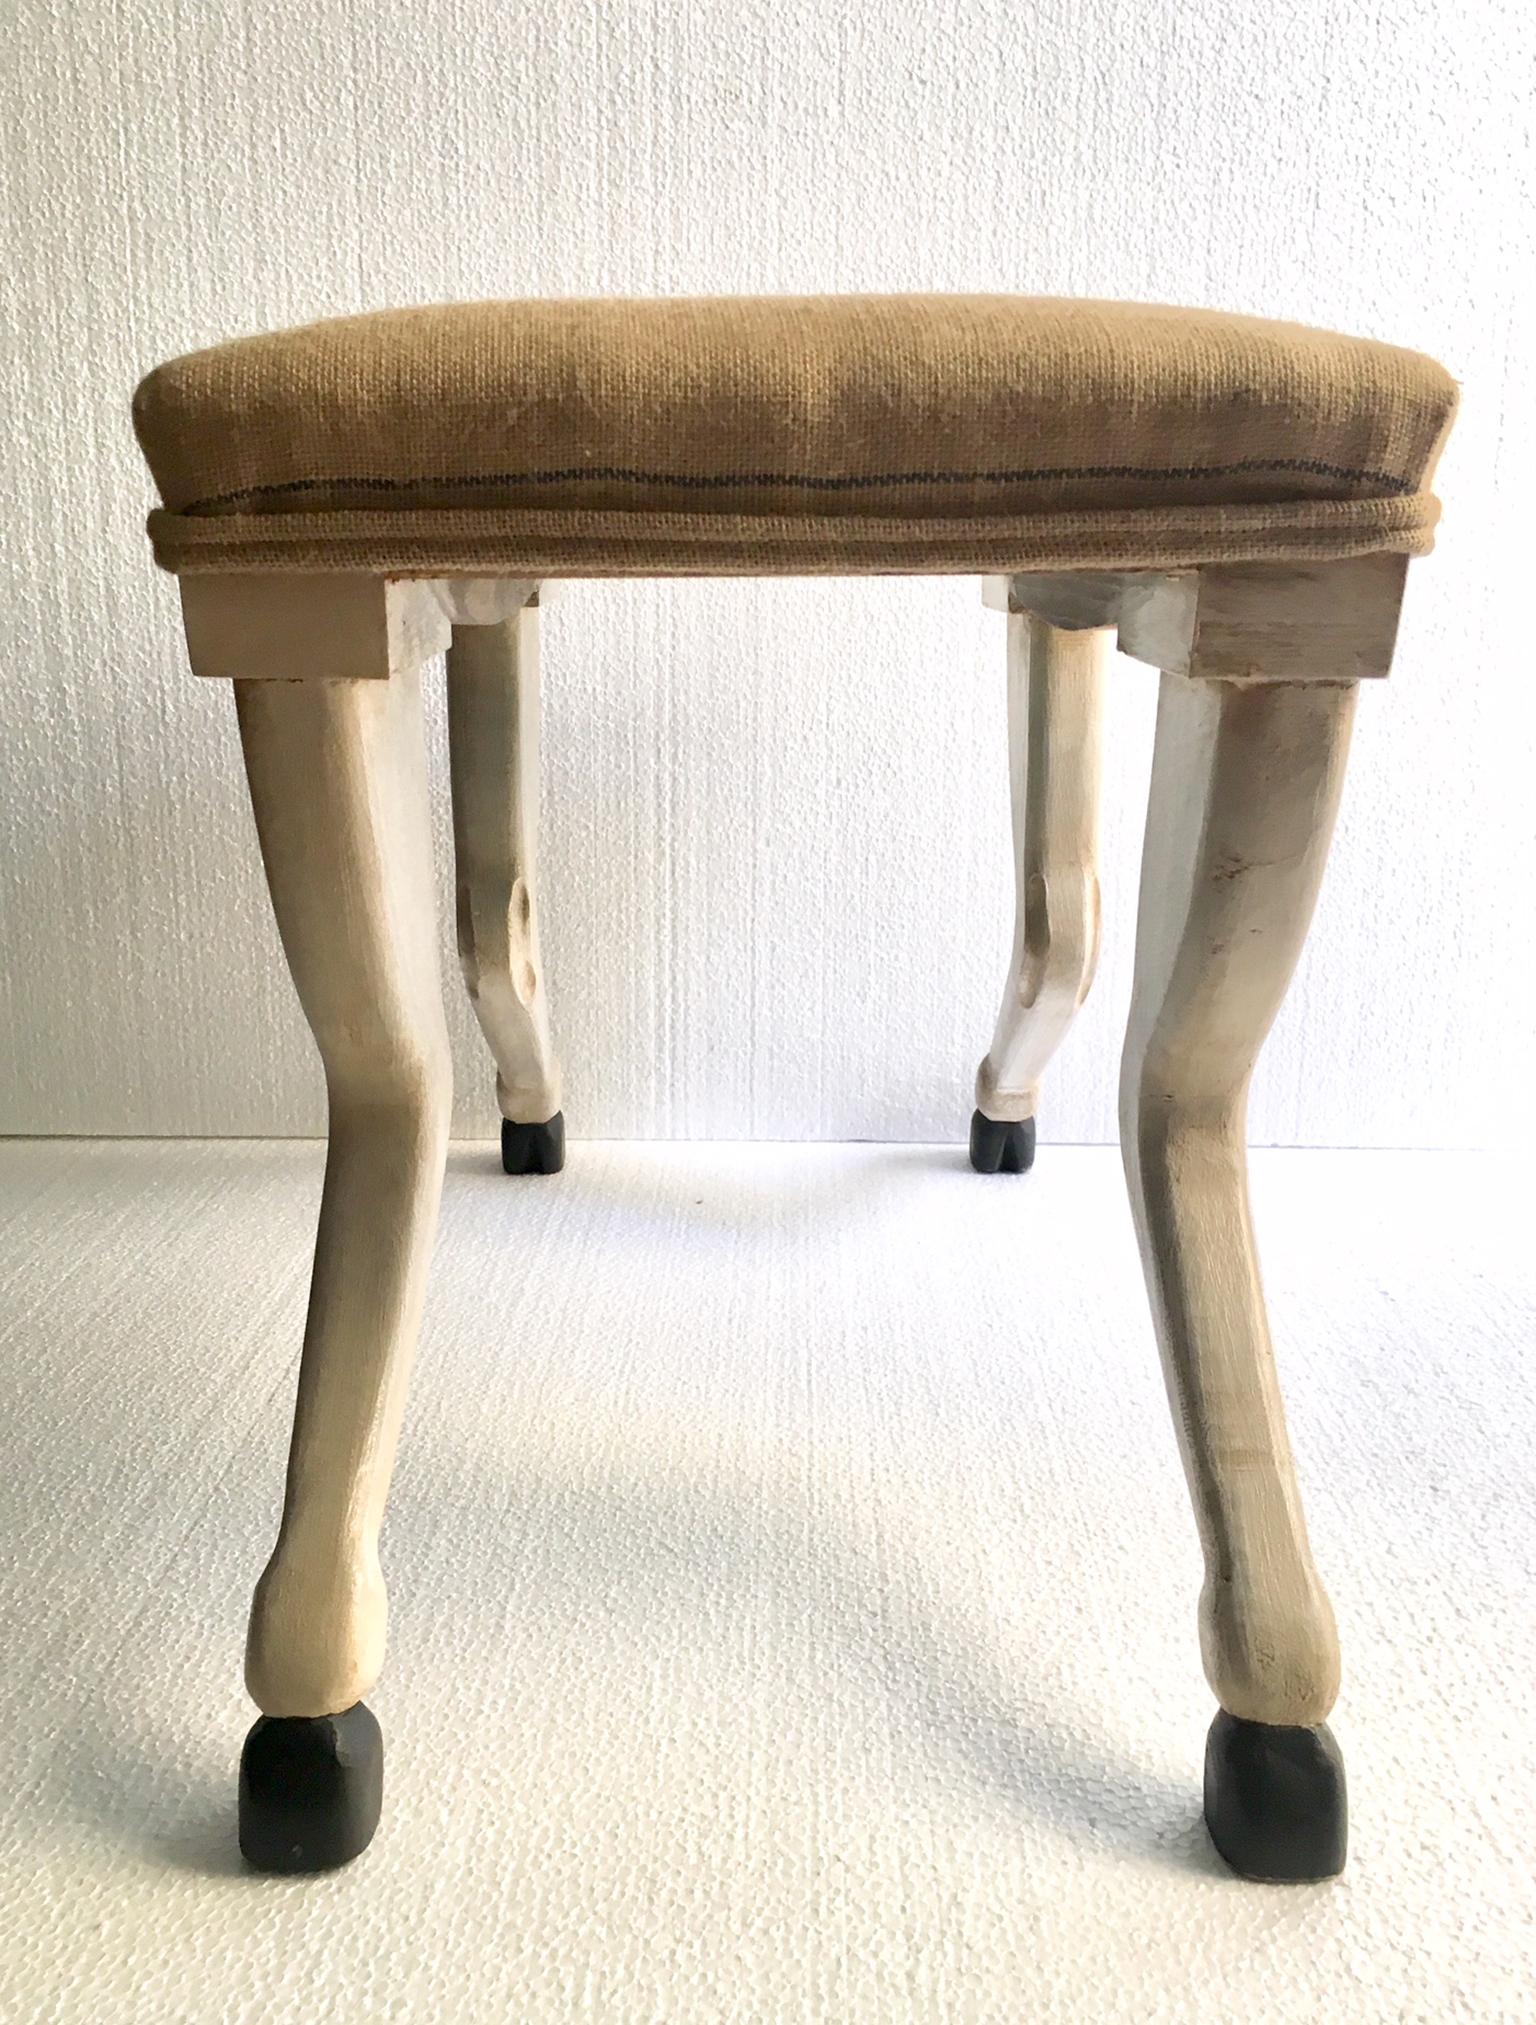 Pair of benches, carved in beech wood, and hand painted, finished in the form of horse legs.